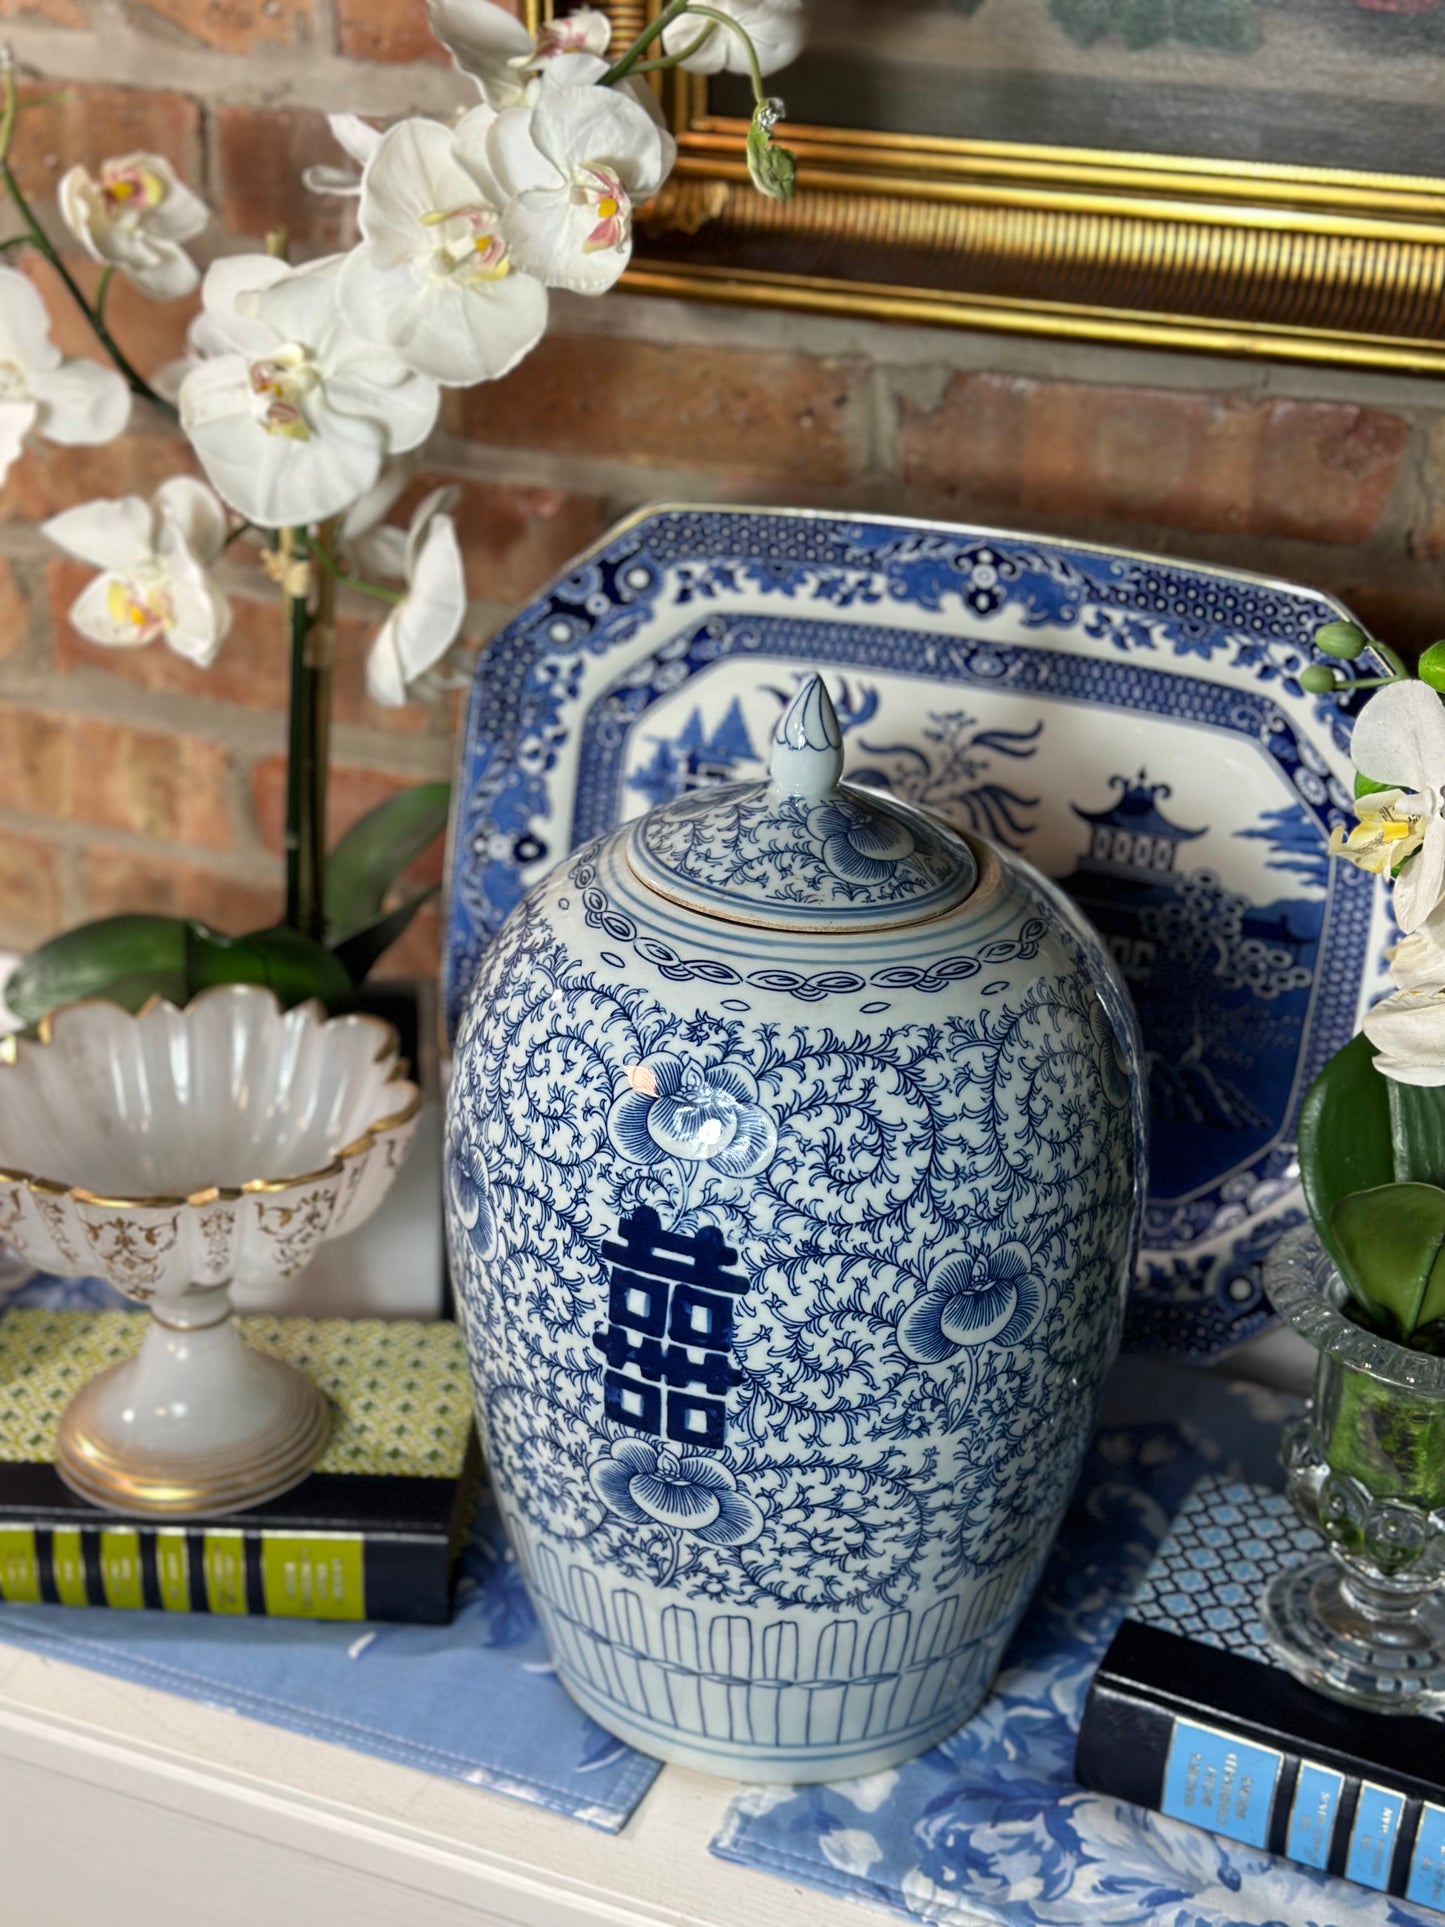 NEW - Blue & White Double Happiness Melon Ginger Jar, 14" Tall